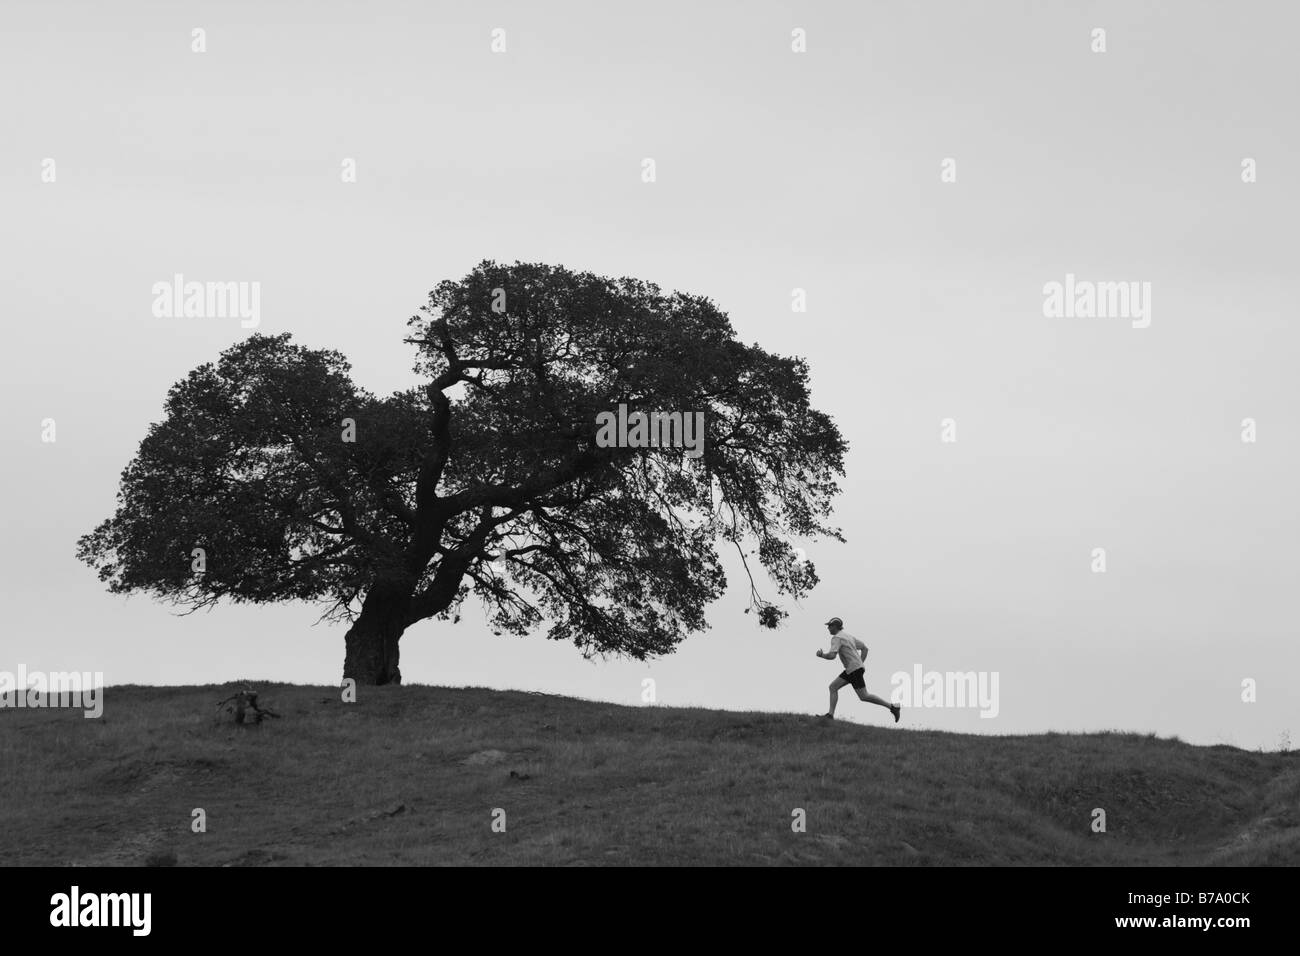 A silhouette of a man running by an oak tree on Patterson Pass near Livermore California Stock Photo